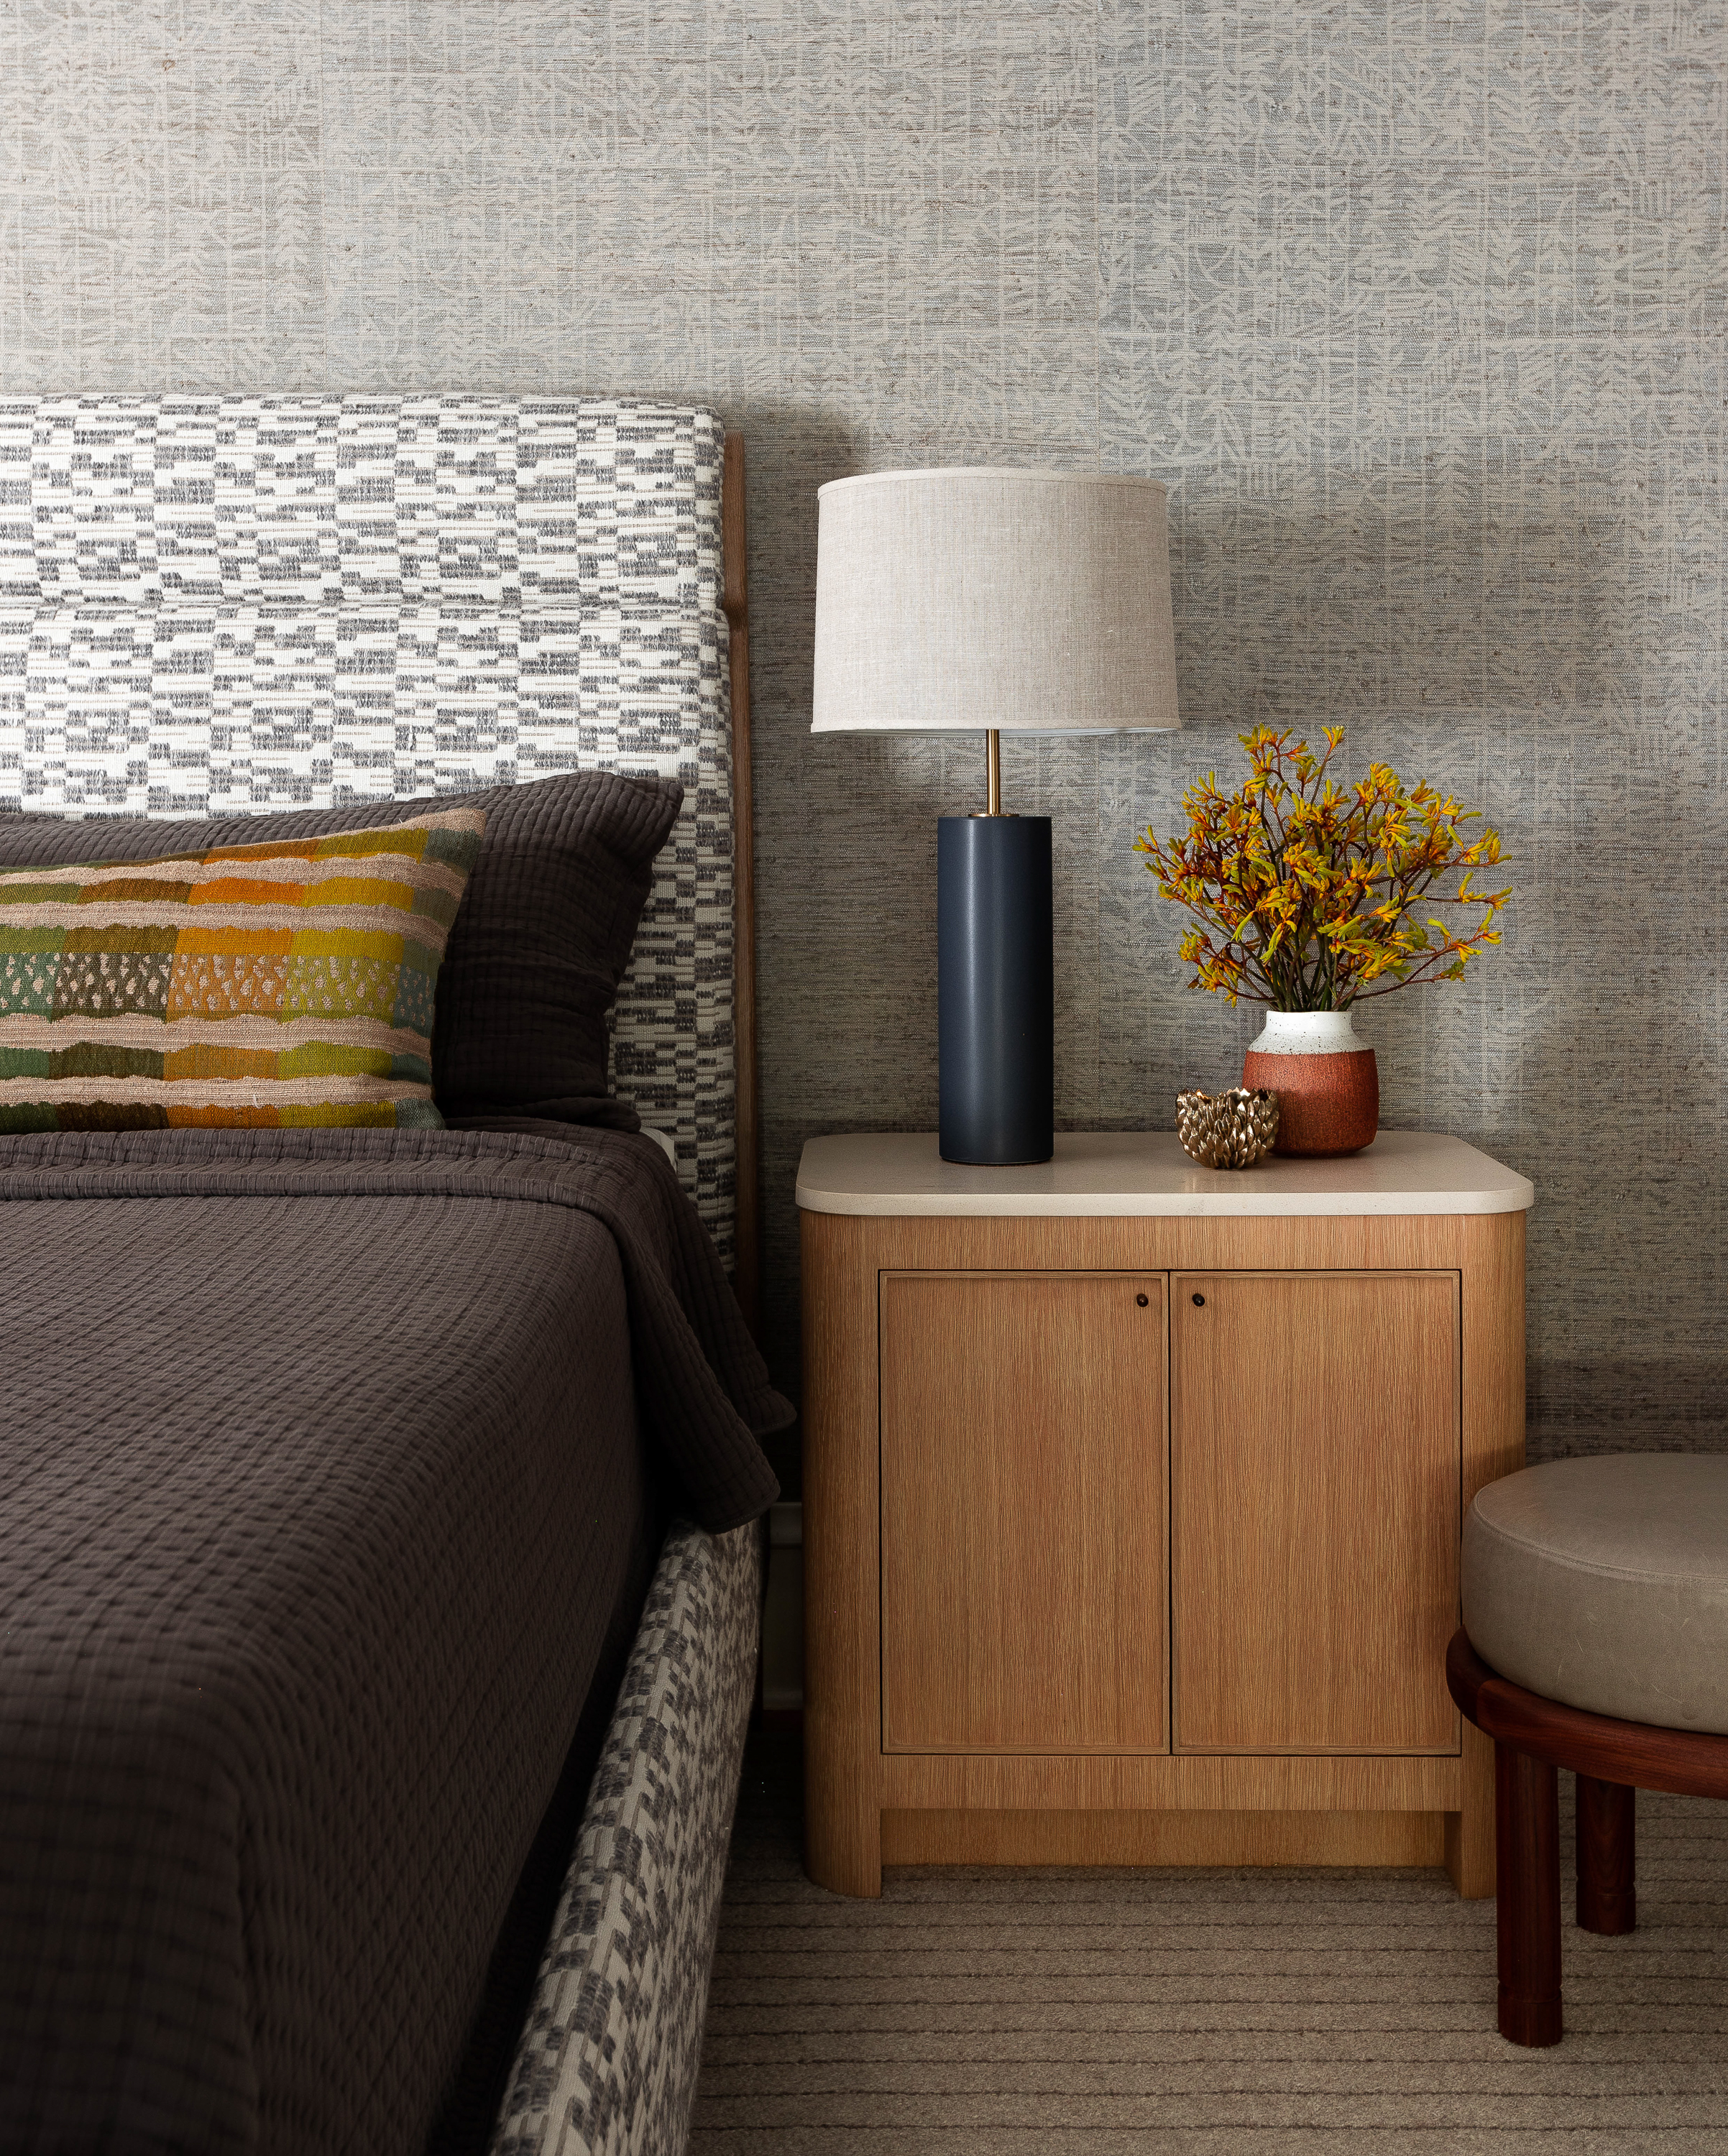 A tribal Mark Alexander Wall Paper meets Pat McGann Fabric in this textile rich bedroom.